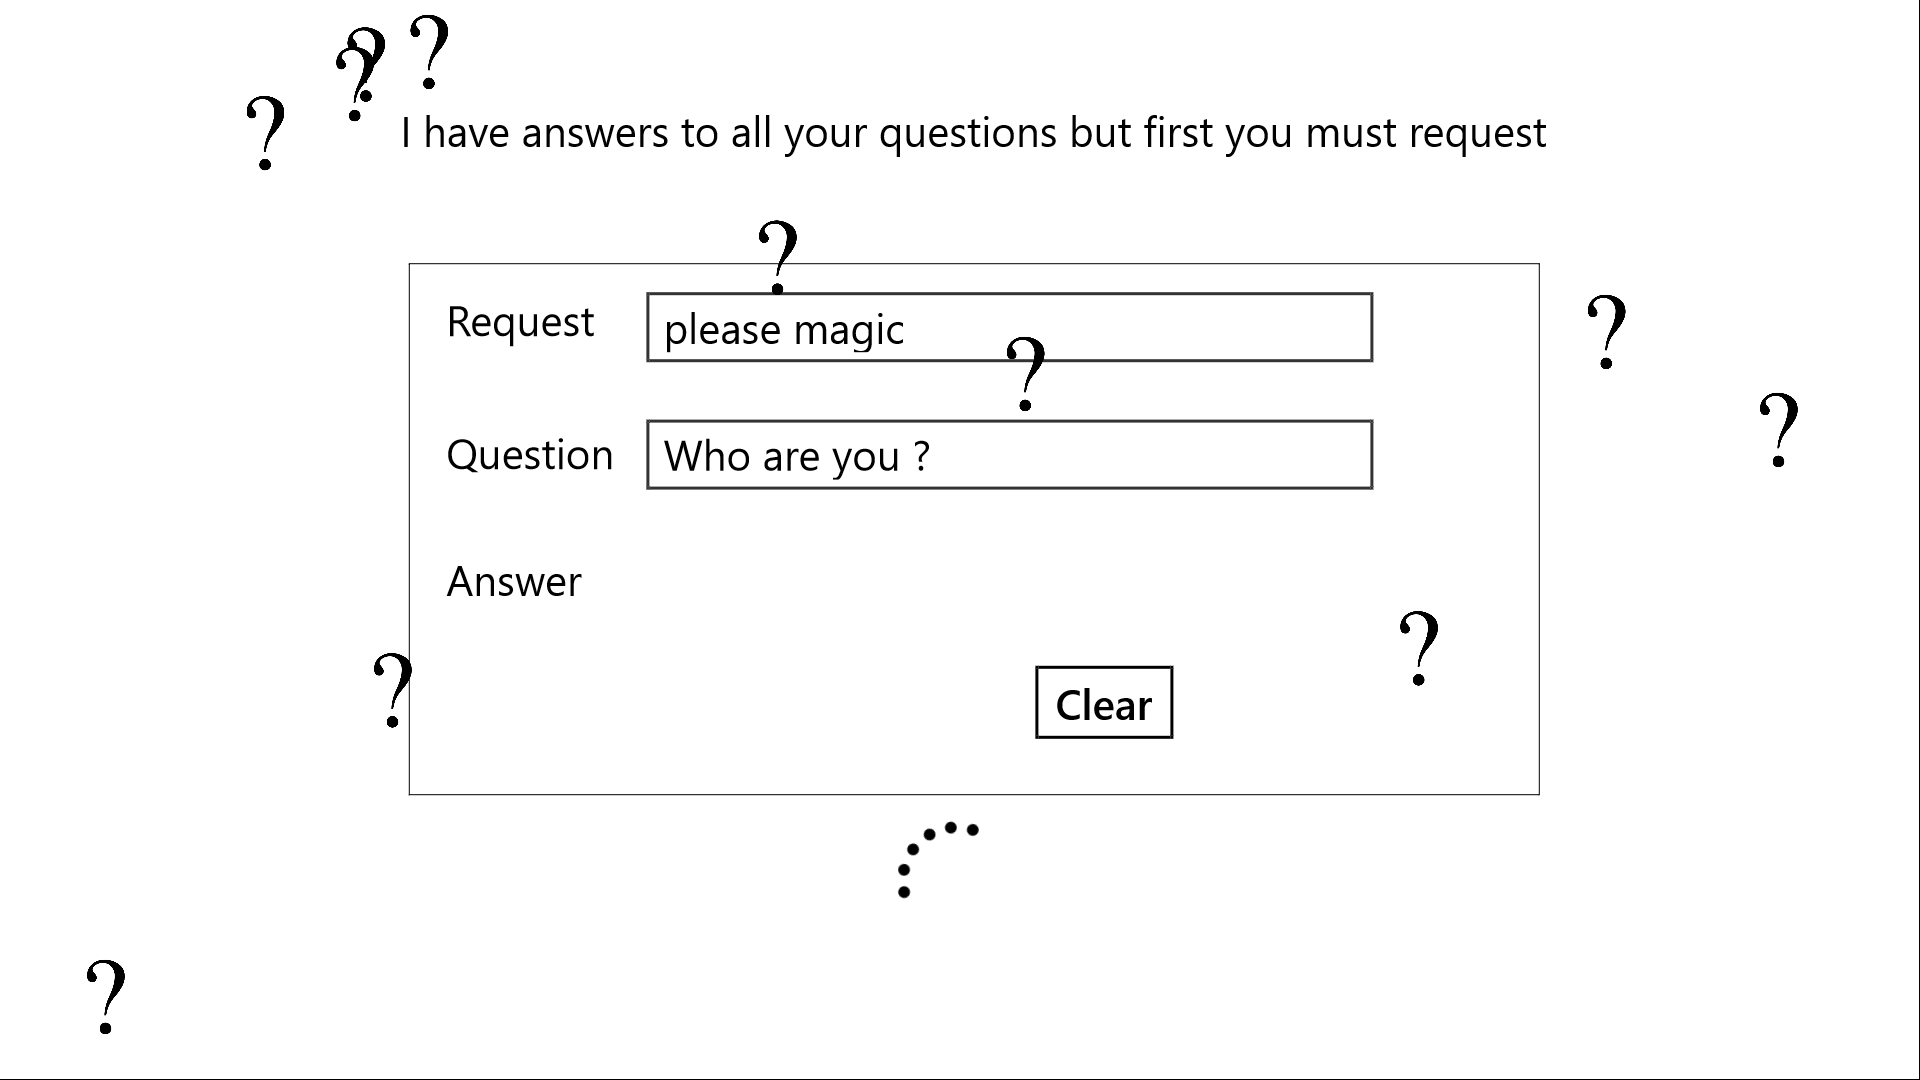 When you know the trick. The application will show the answer